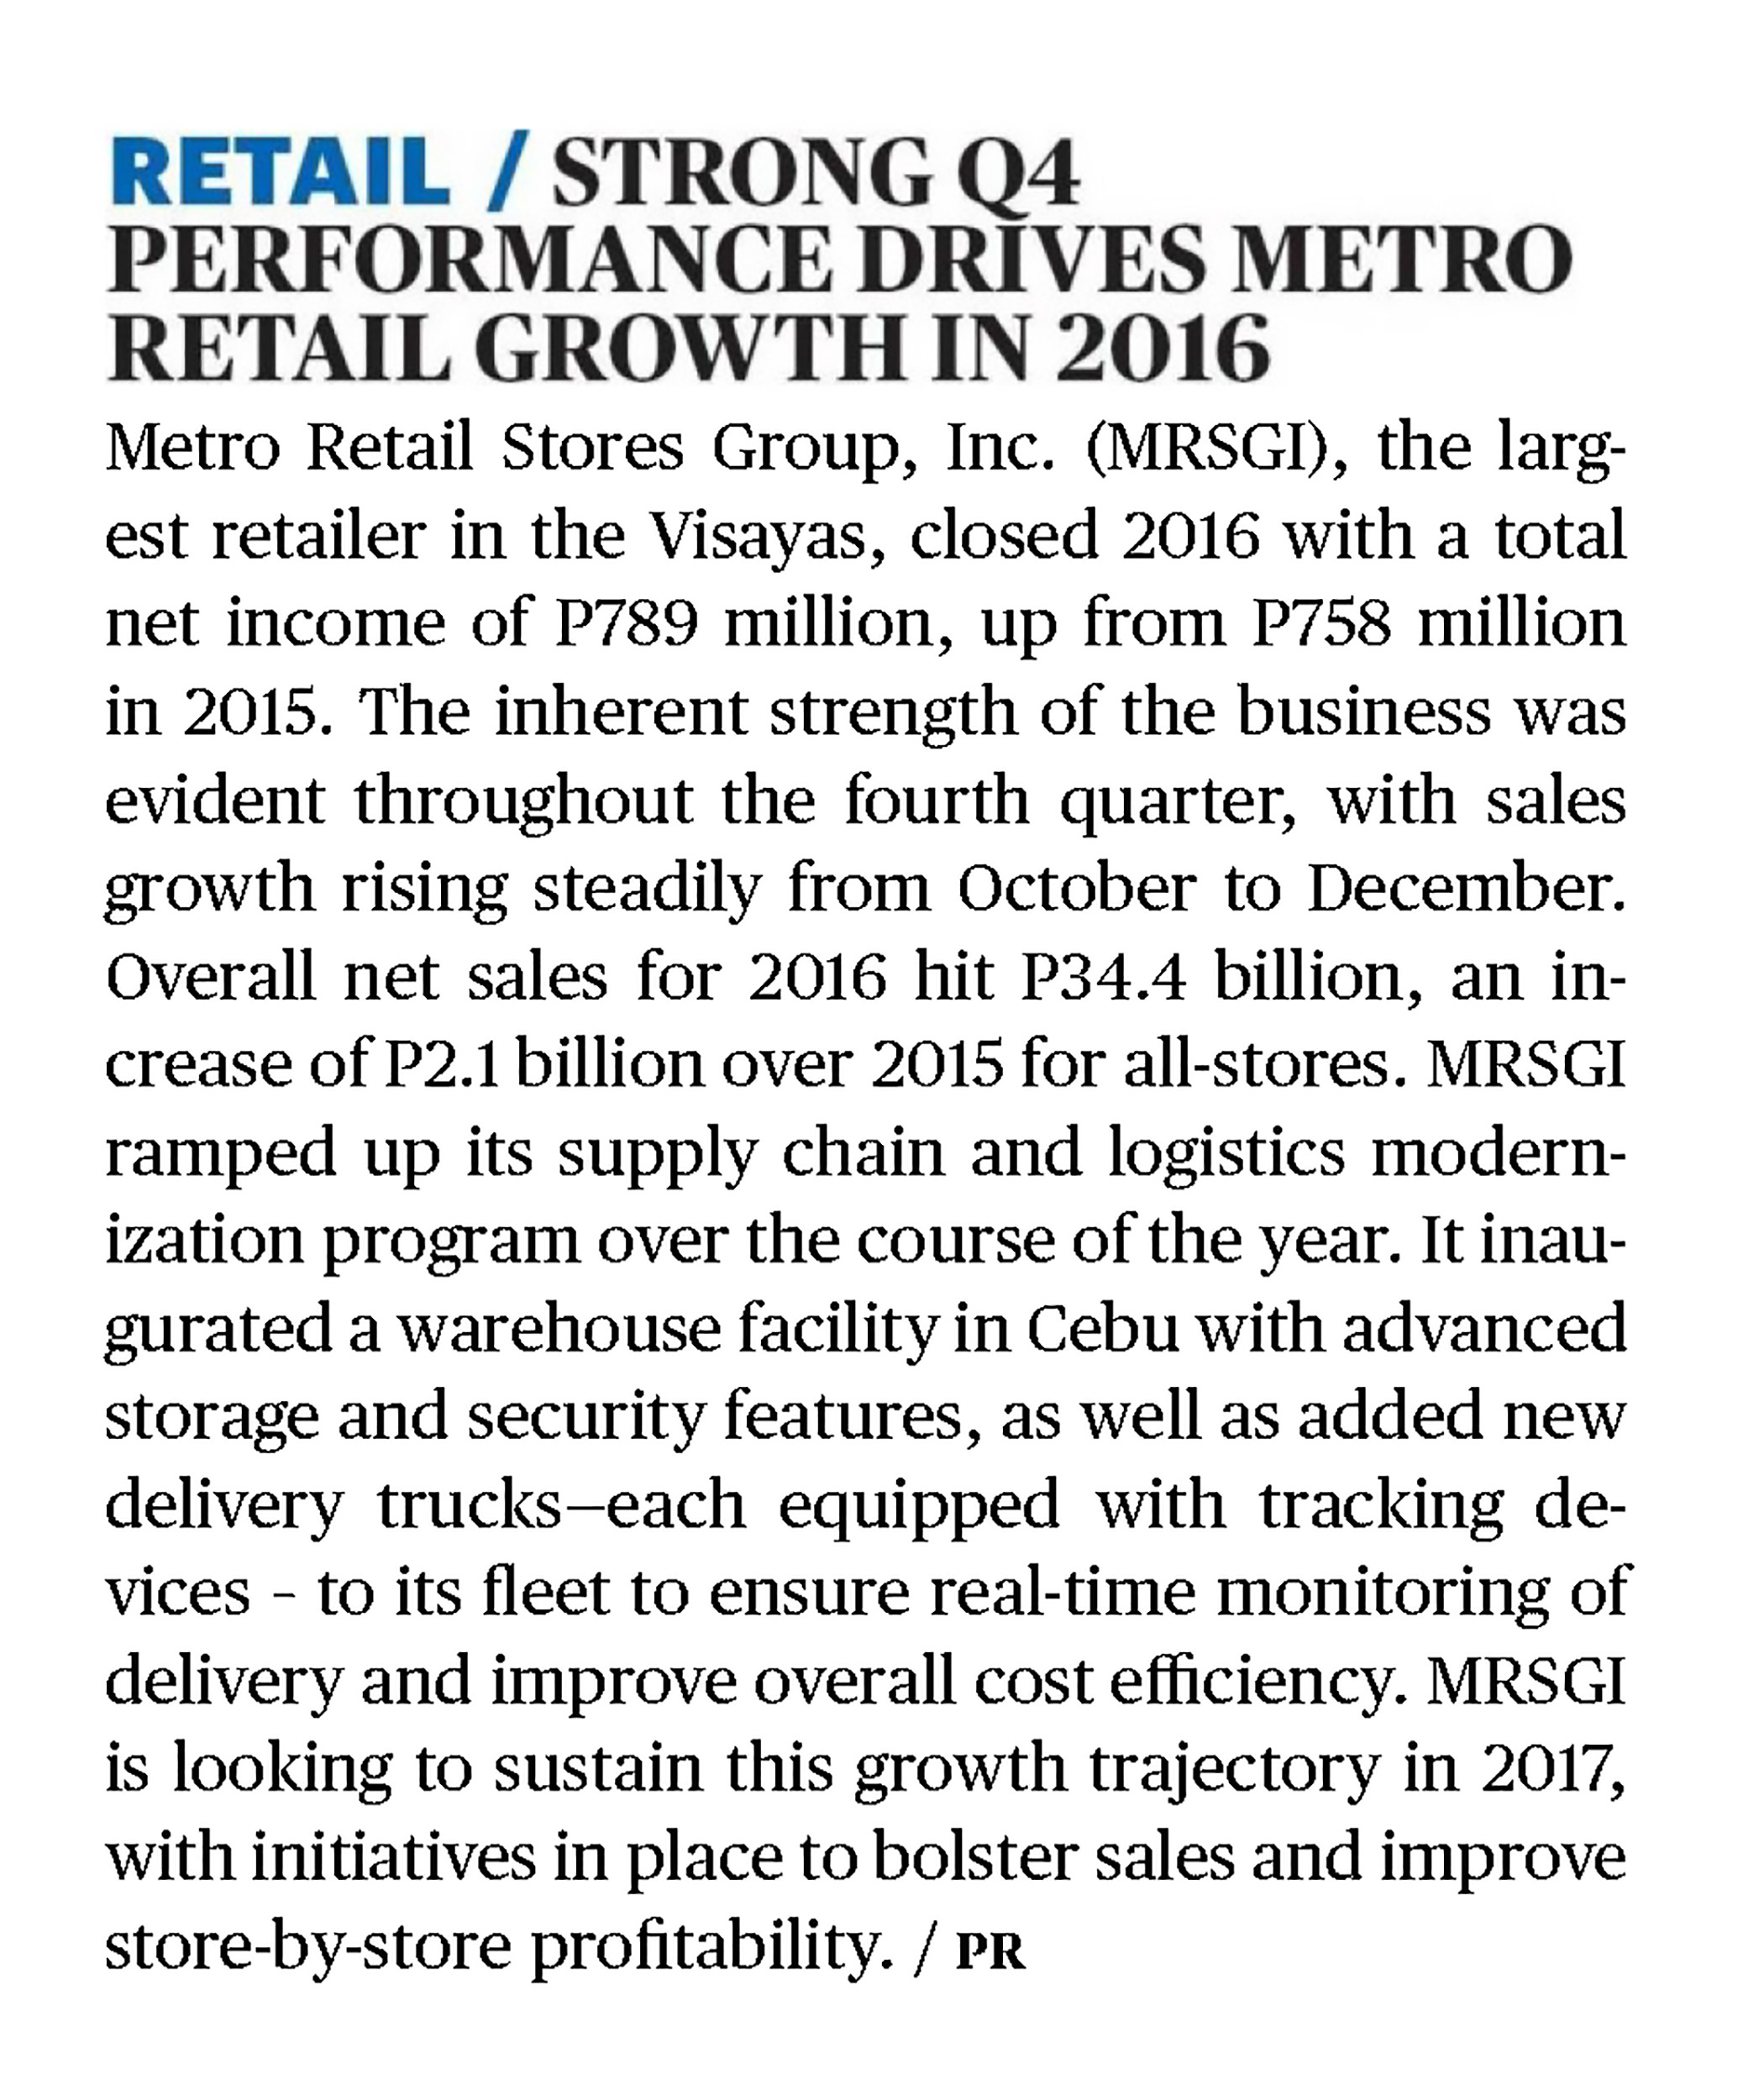 RETAIL STRONG Q4 PERFORMANCE DRIVES METRO RETAIL GROWTH